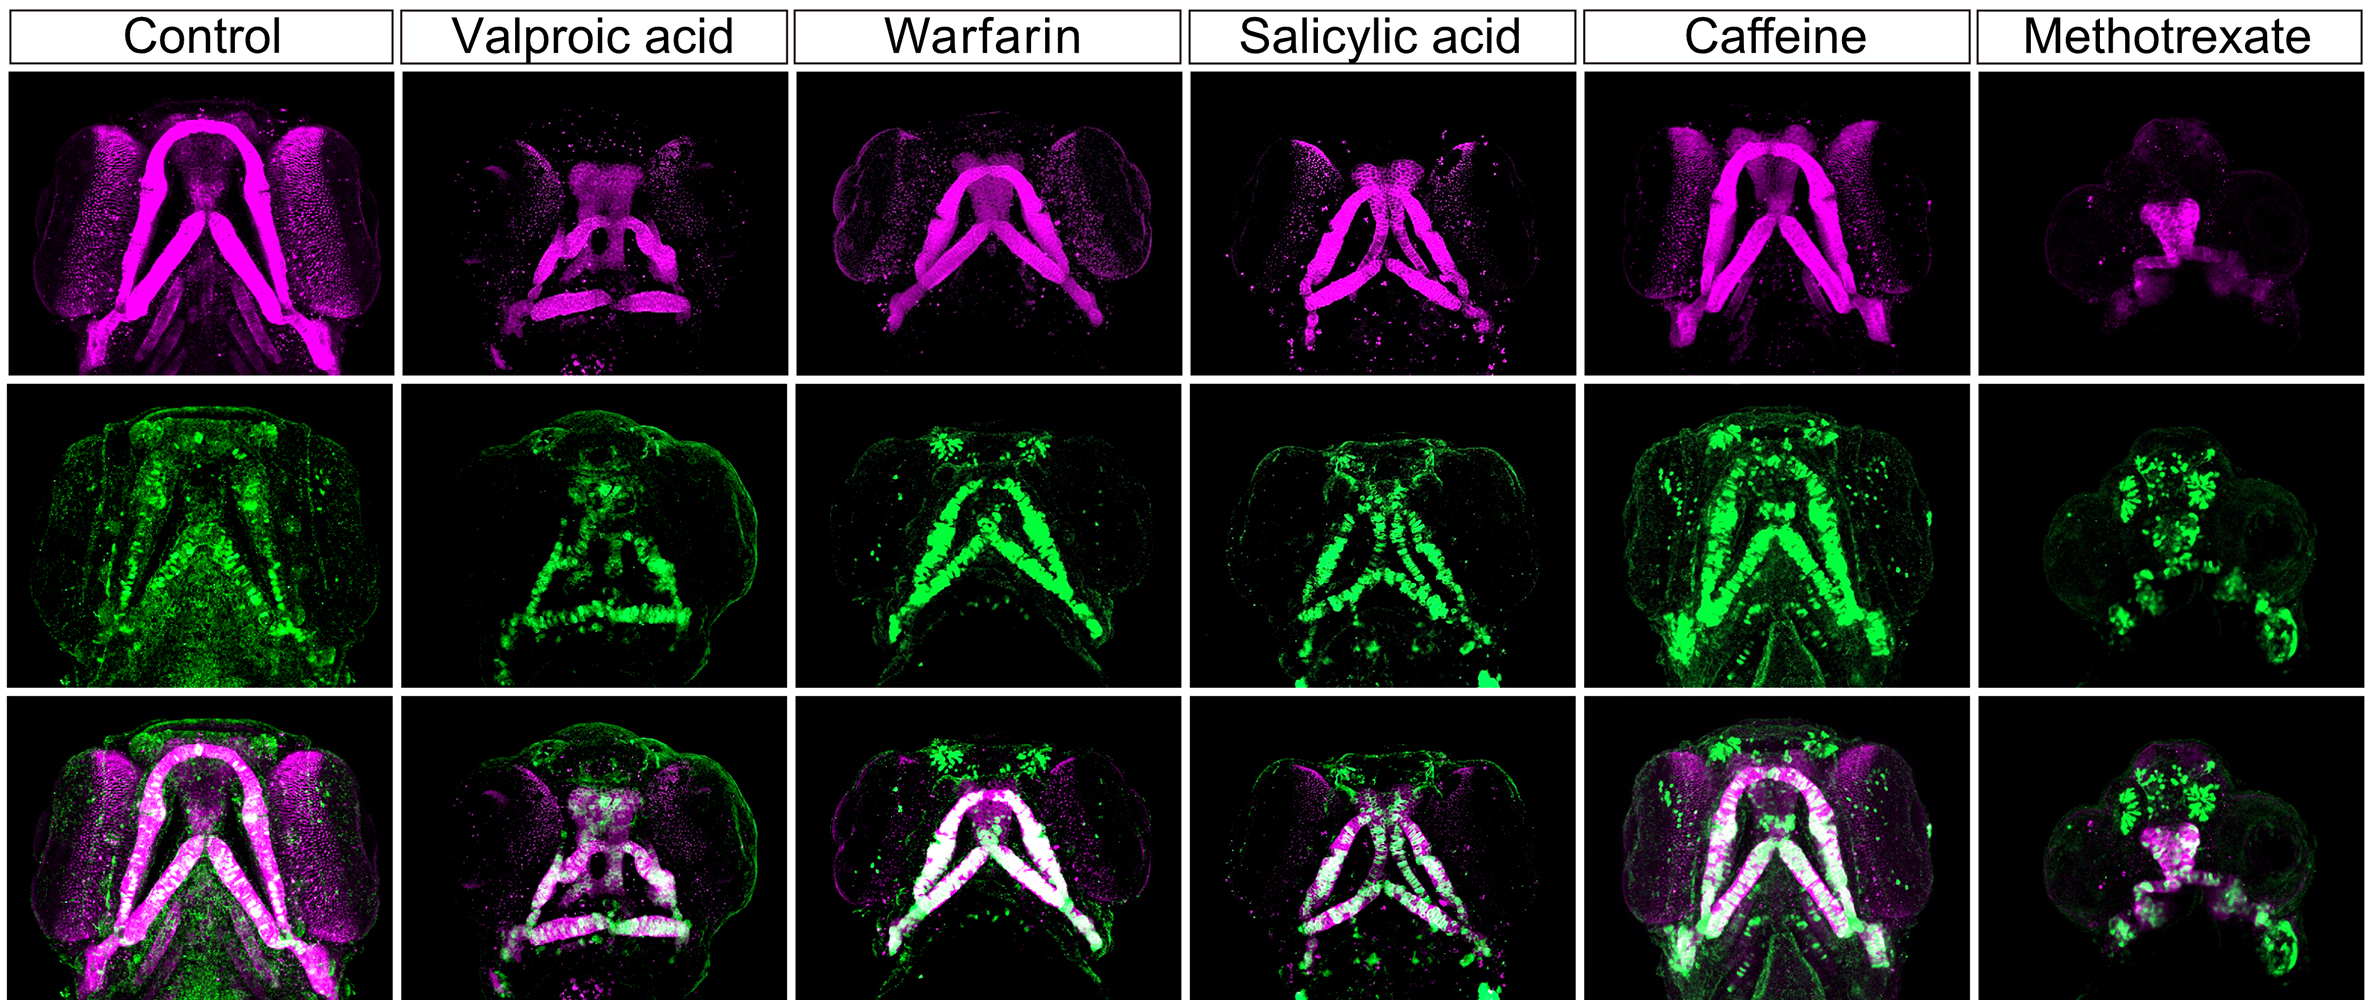 Images of the impact of five substances on zebrafish facial development, shown in purple and green fluorescent coloured features against black bagrounds.